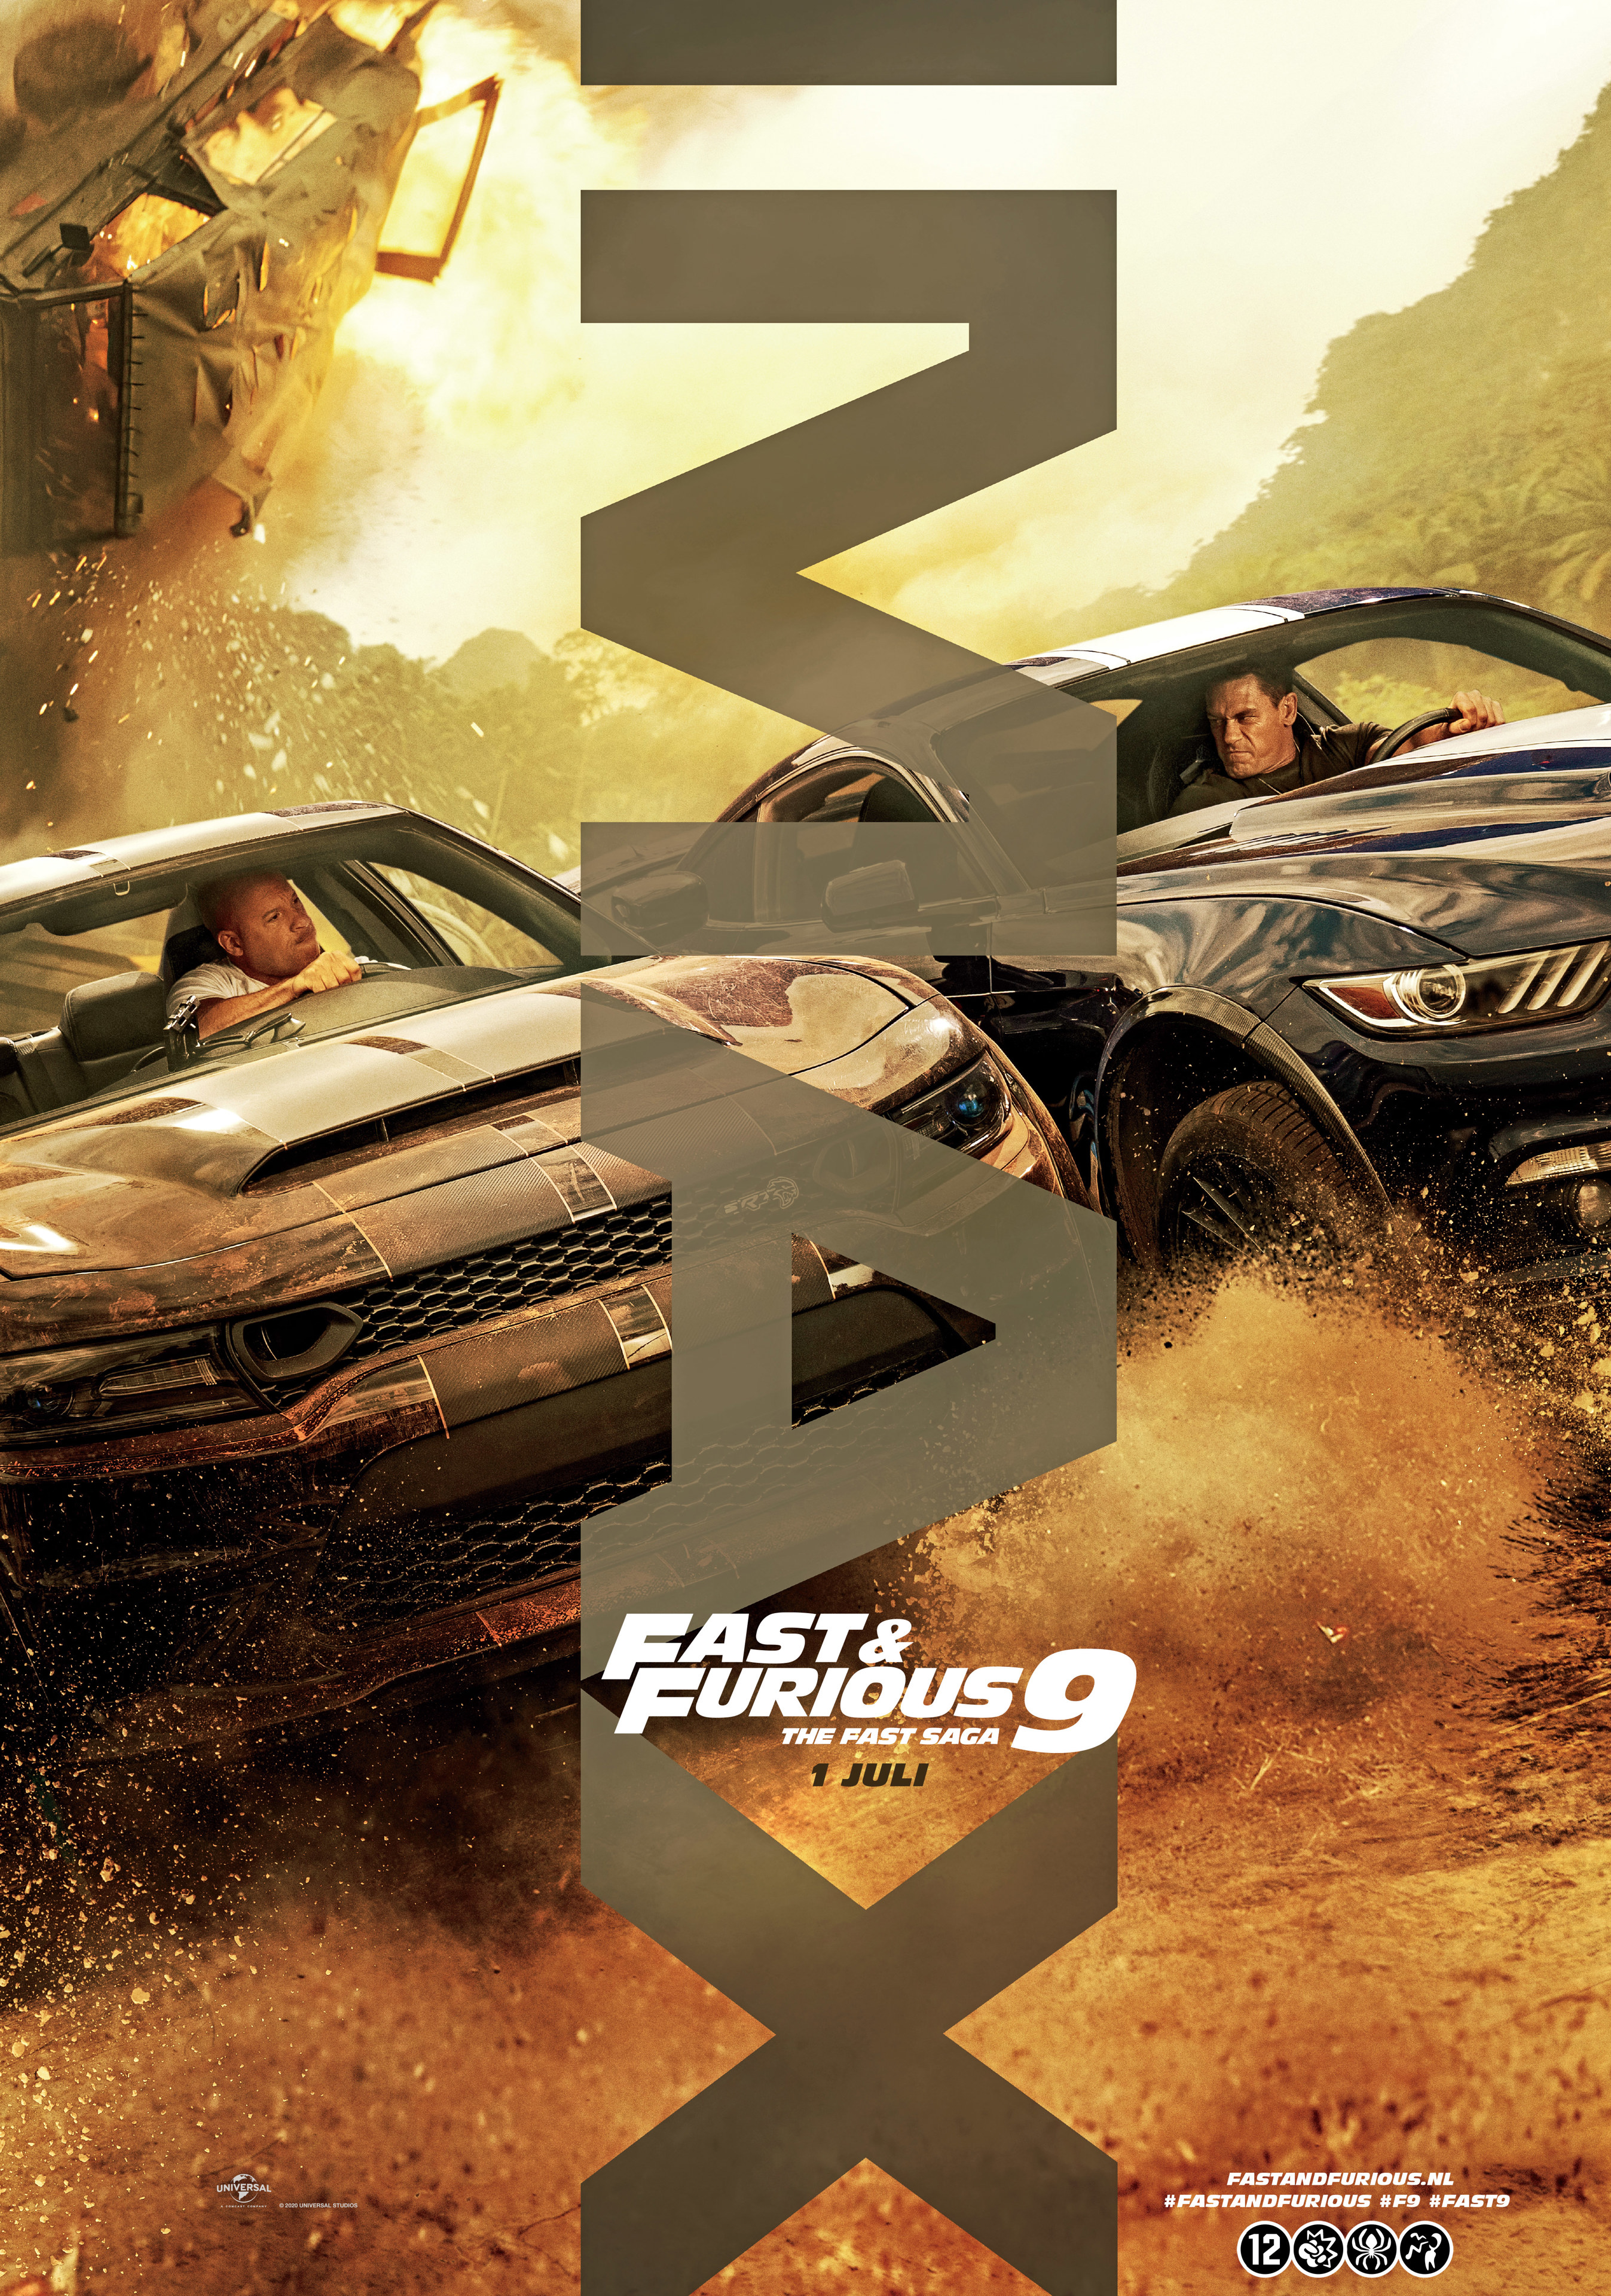 Movie fast 9 and furious online full [.Watch] F9